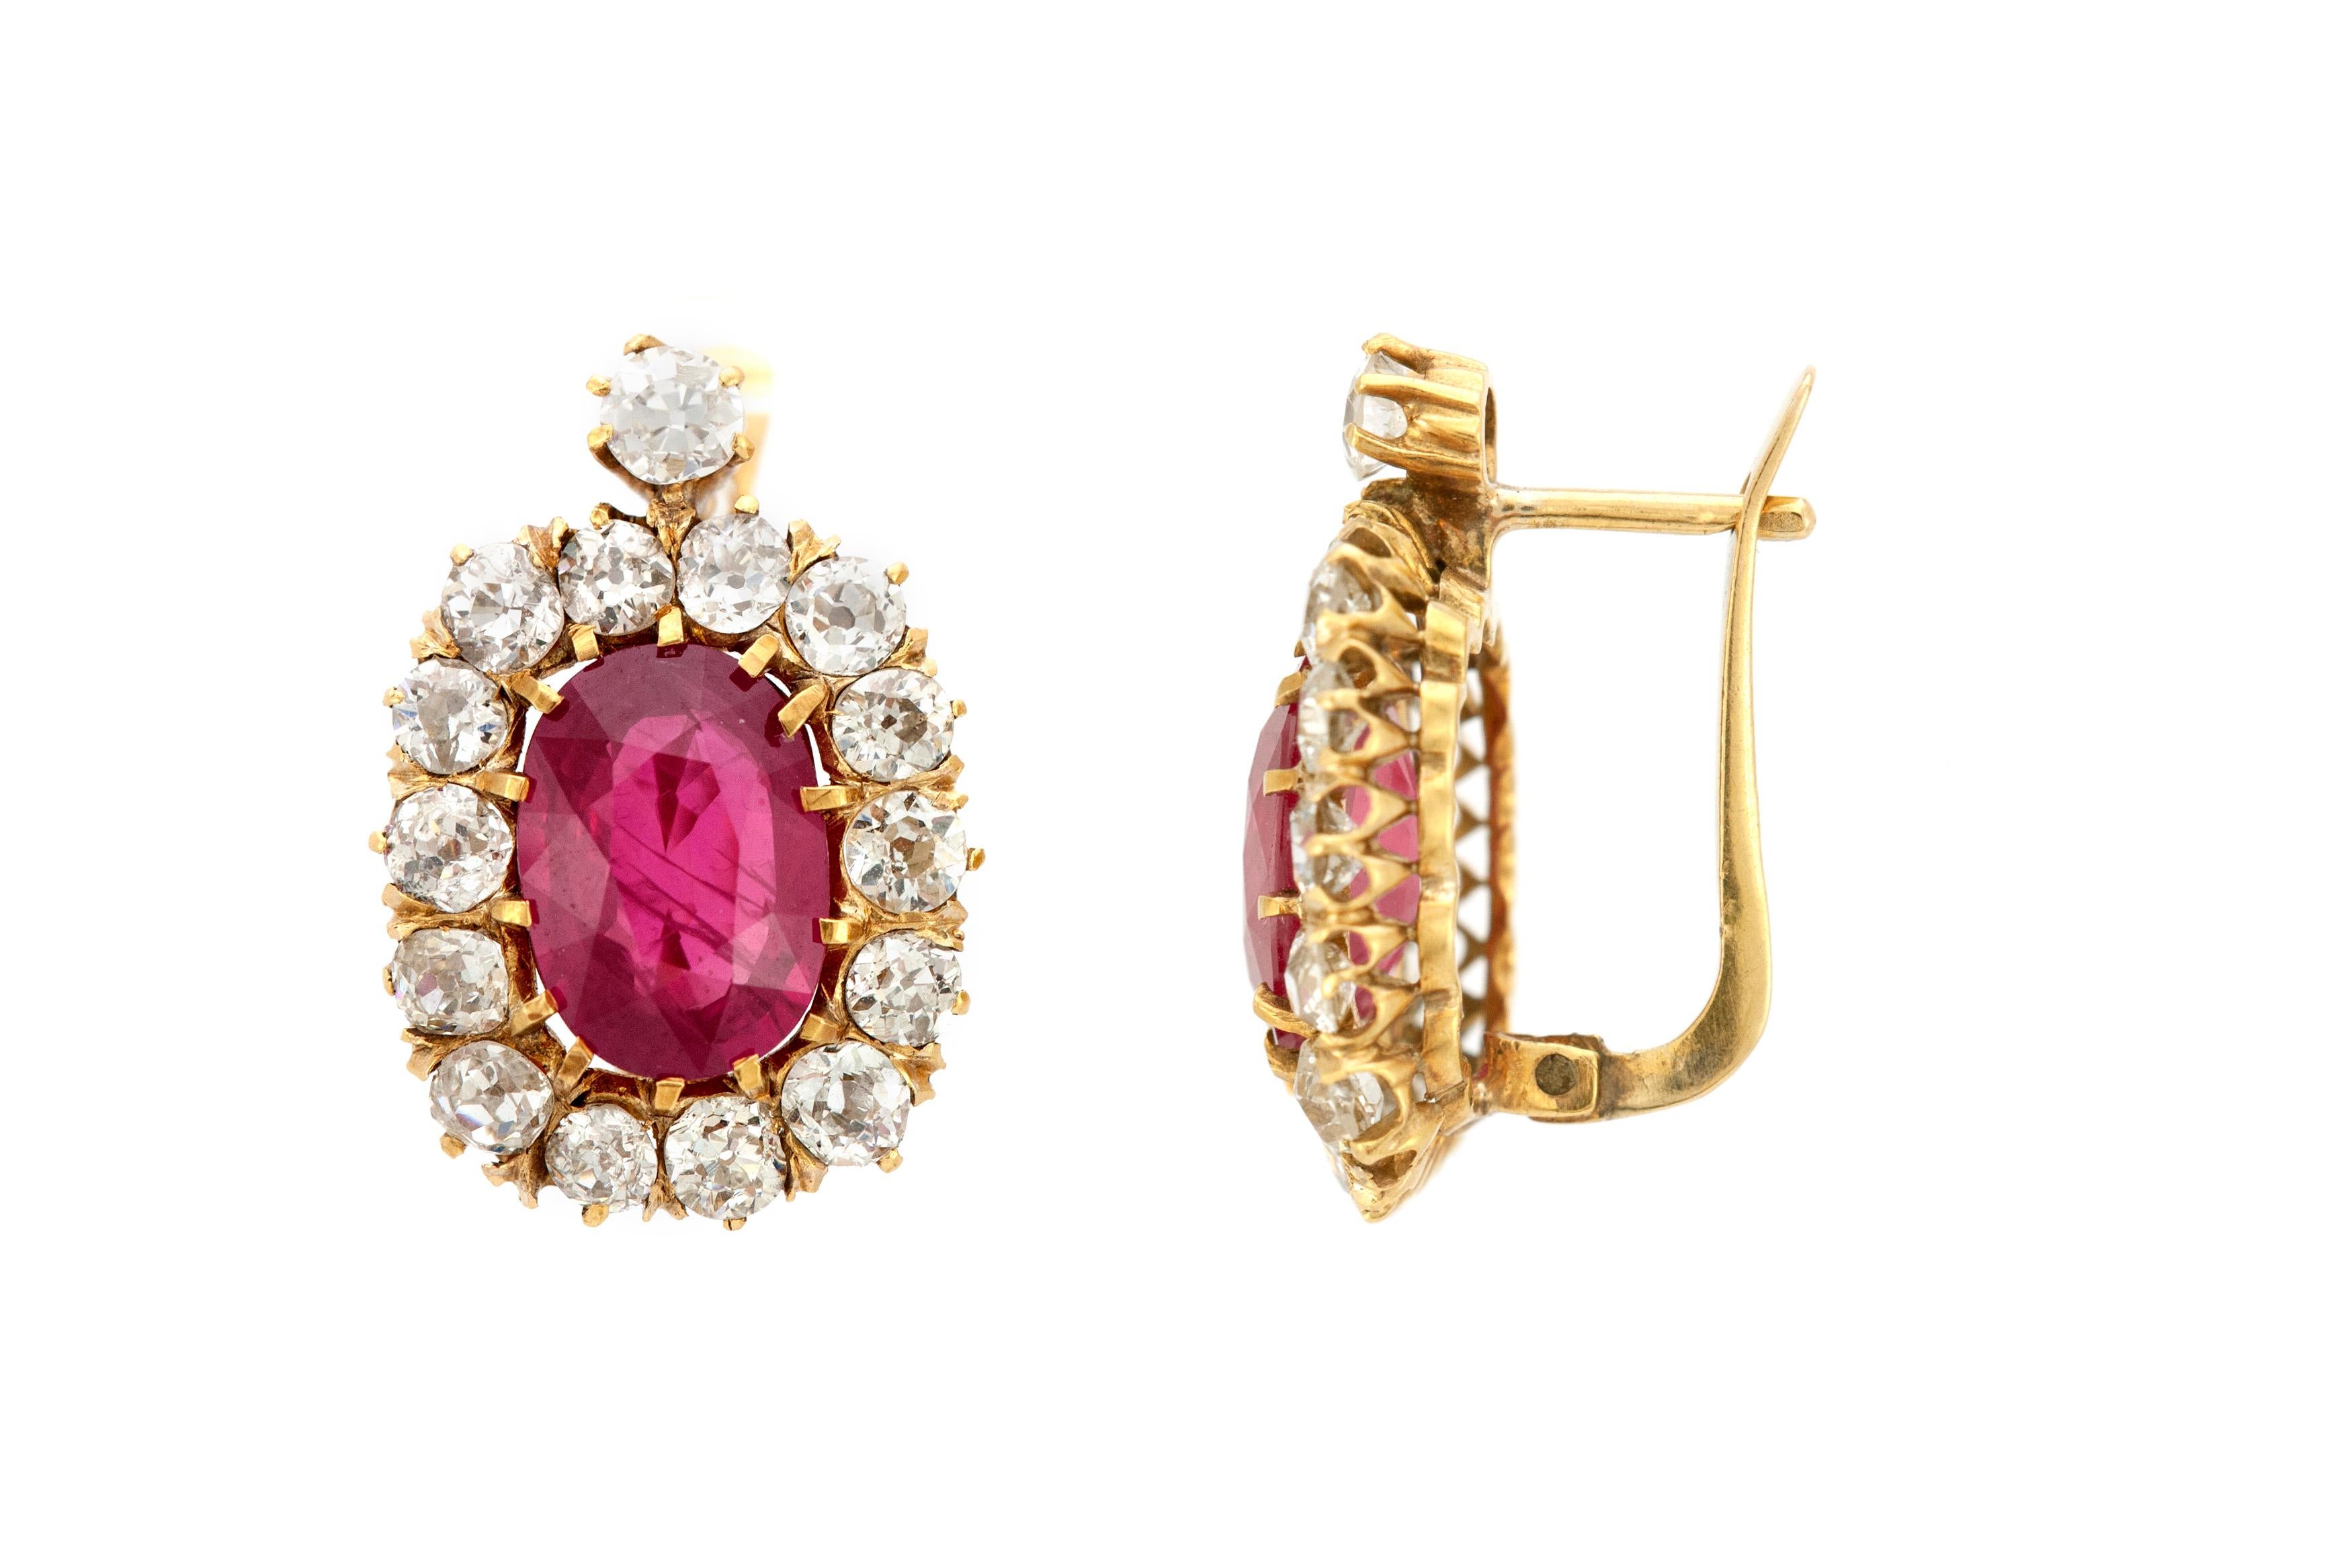 The earrings are finely crafted in 18k yellow gold with rubies weighing approximately a total of 6.21 carat.
One ruby weighs approximately 2.63 and the other one is 3.58 carat.
Diamonds weigh approximately a total of 5.00 carat.